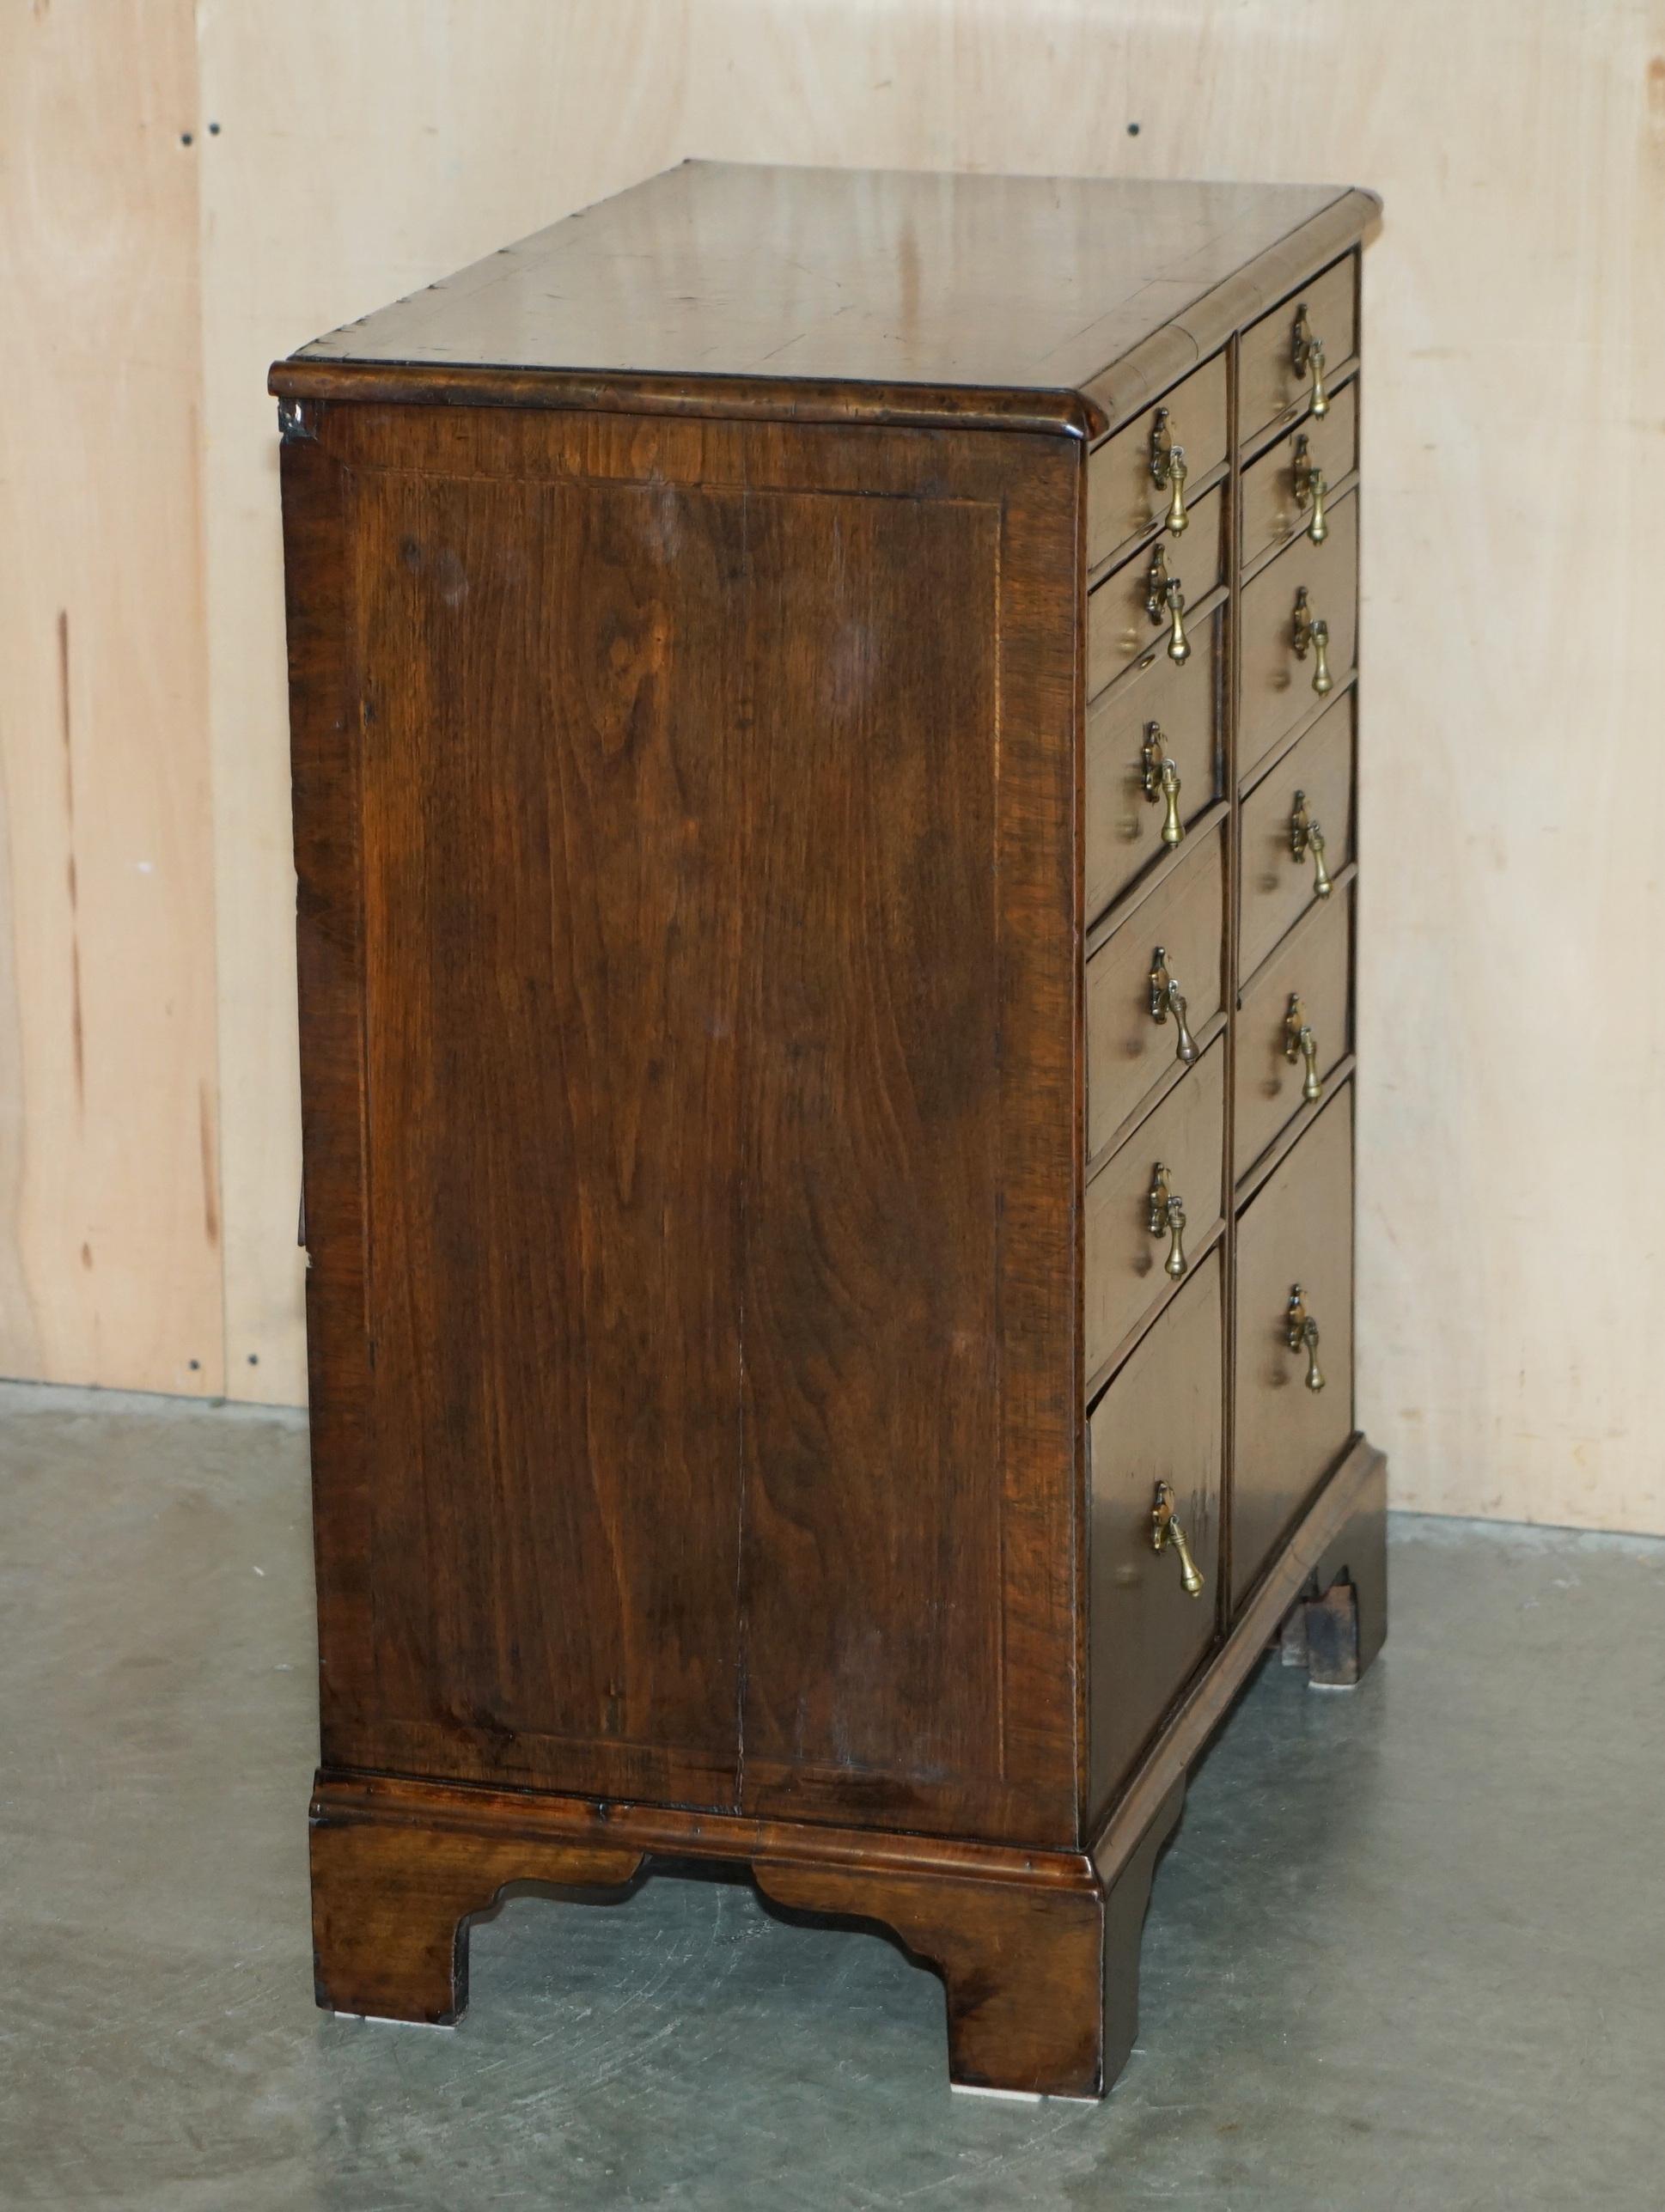 EXQUISITE ANTIQUE CIRCA 1760 BURR WALNUT GEORGE III BANK / CHEST OF DRAWERs For Sale 6